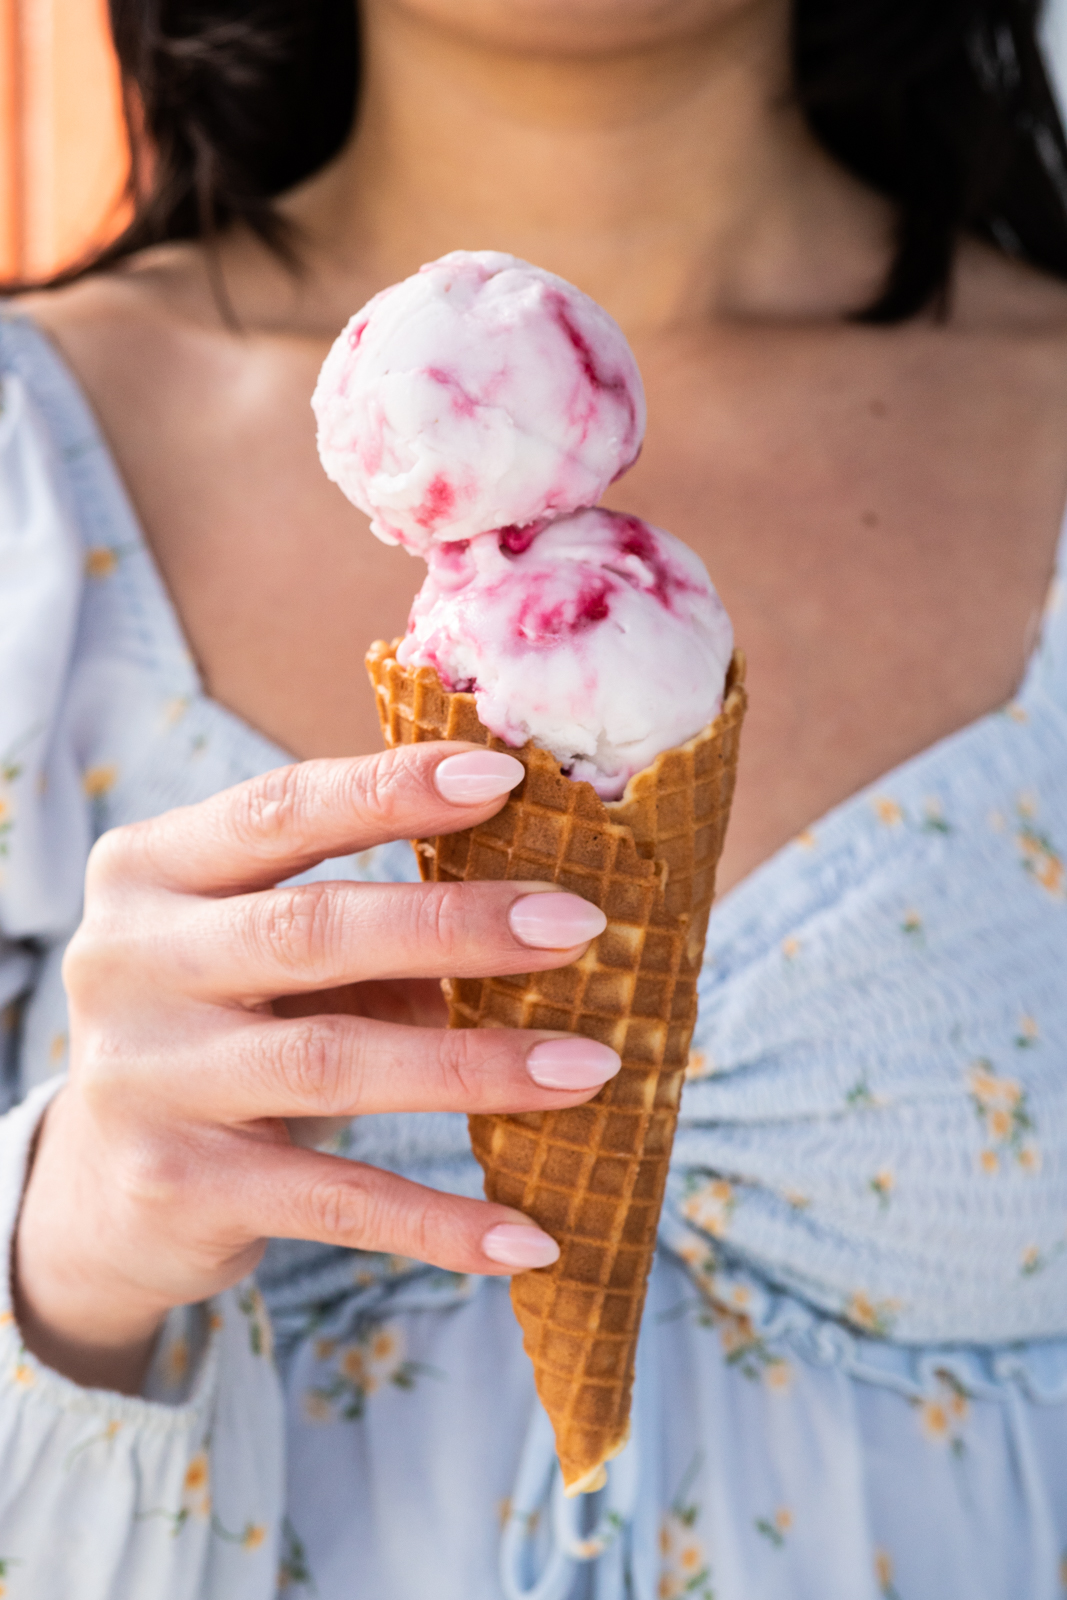 Woman's hand holding a vanilla cone topped with 2 scoops of Dairy-Free Coconut Hibiscus ice cream